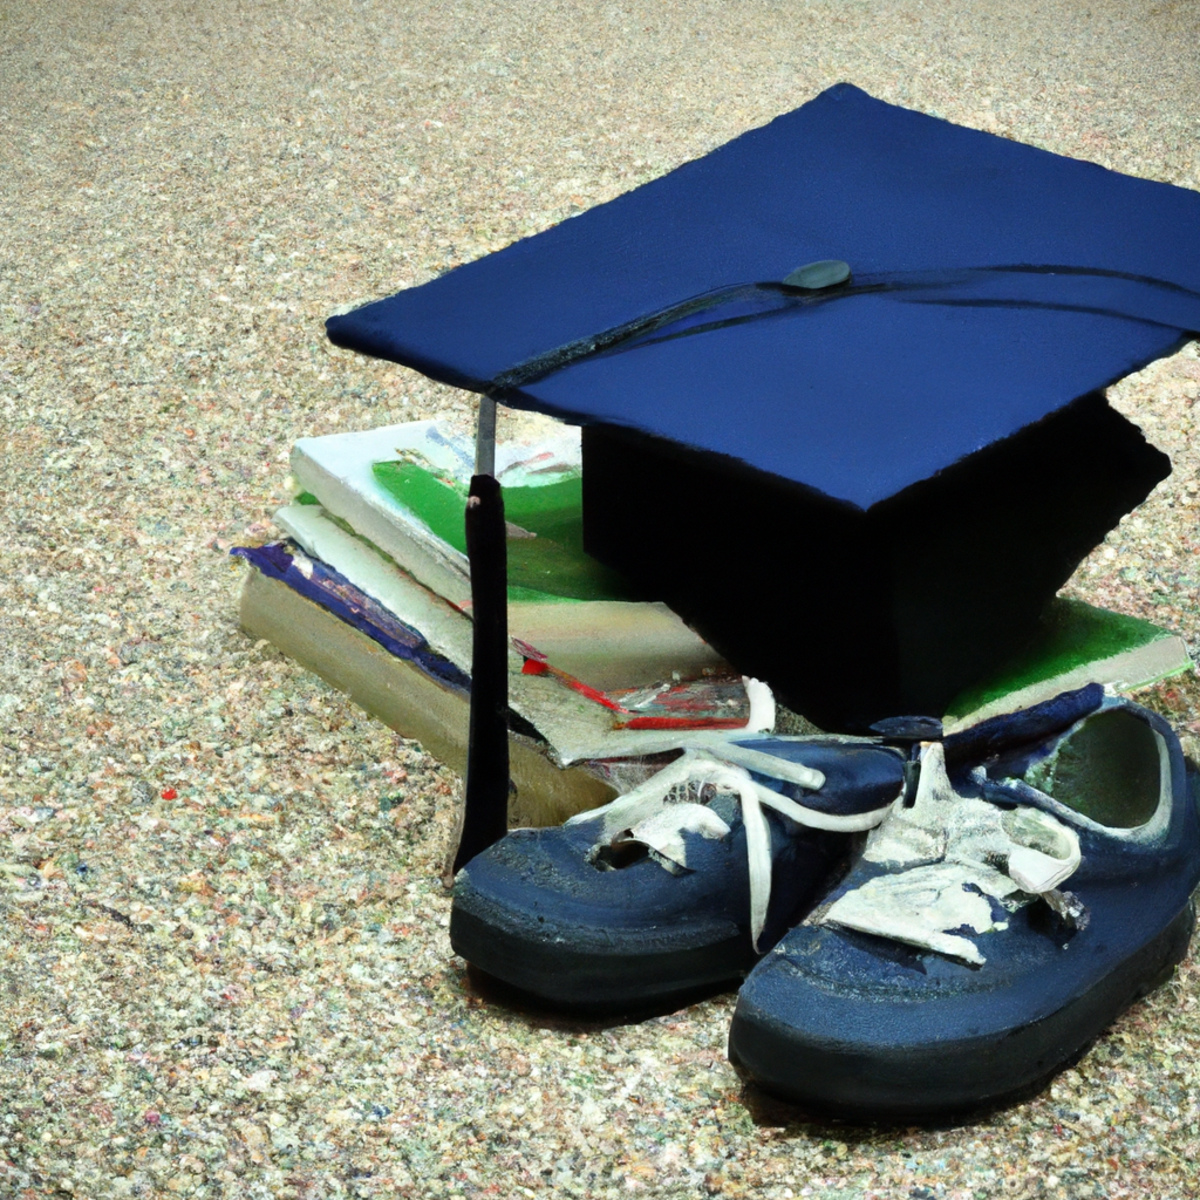 Sneakers, cap, books, compass, calendar, and pen symbolize growth, education, challenges, planning, and aspirations in children with Hurler Syndrome.